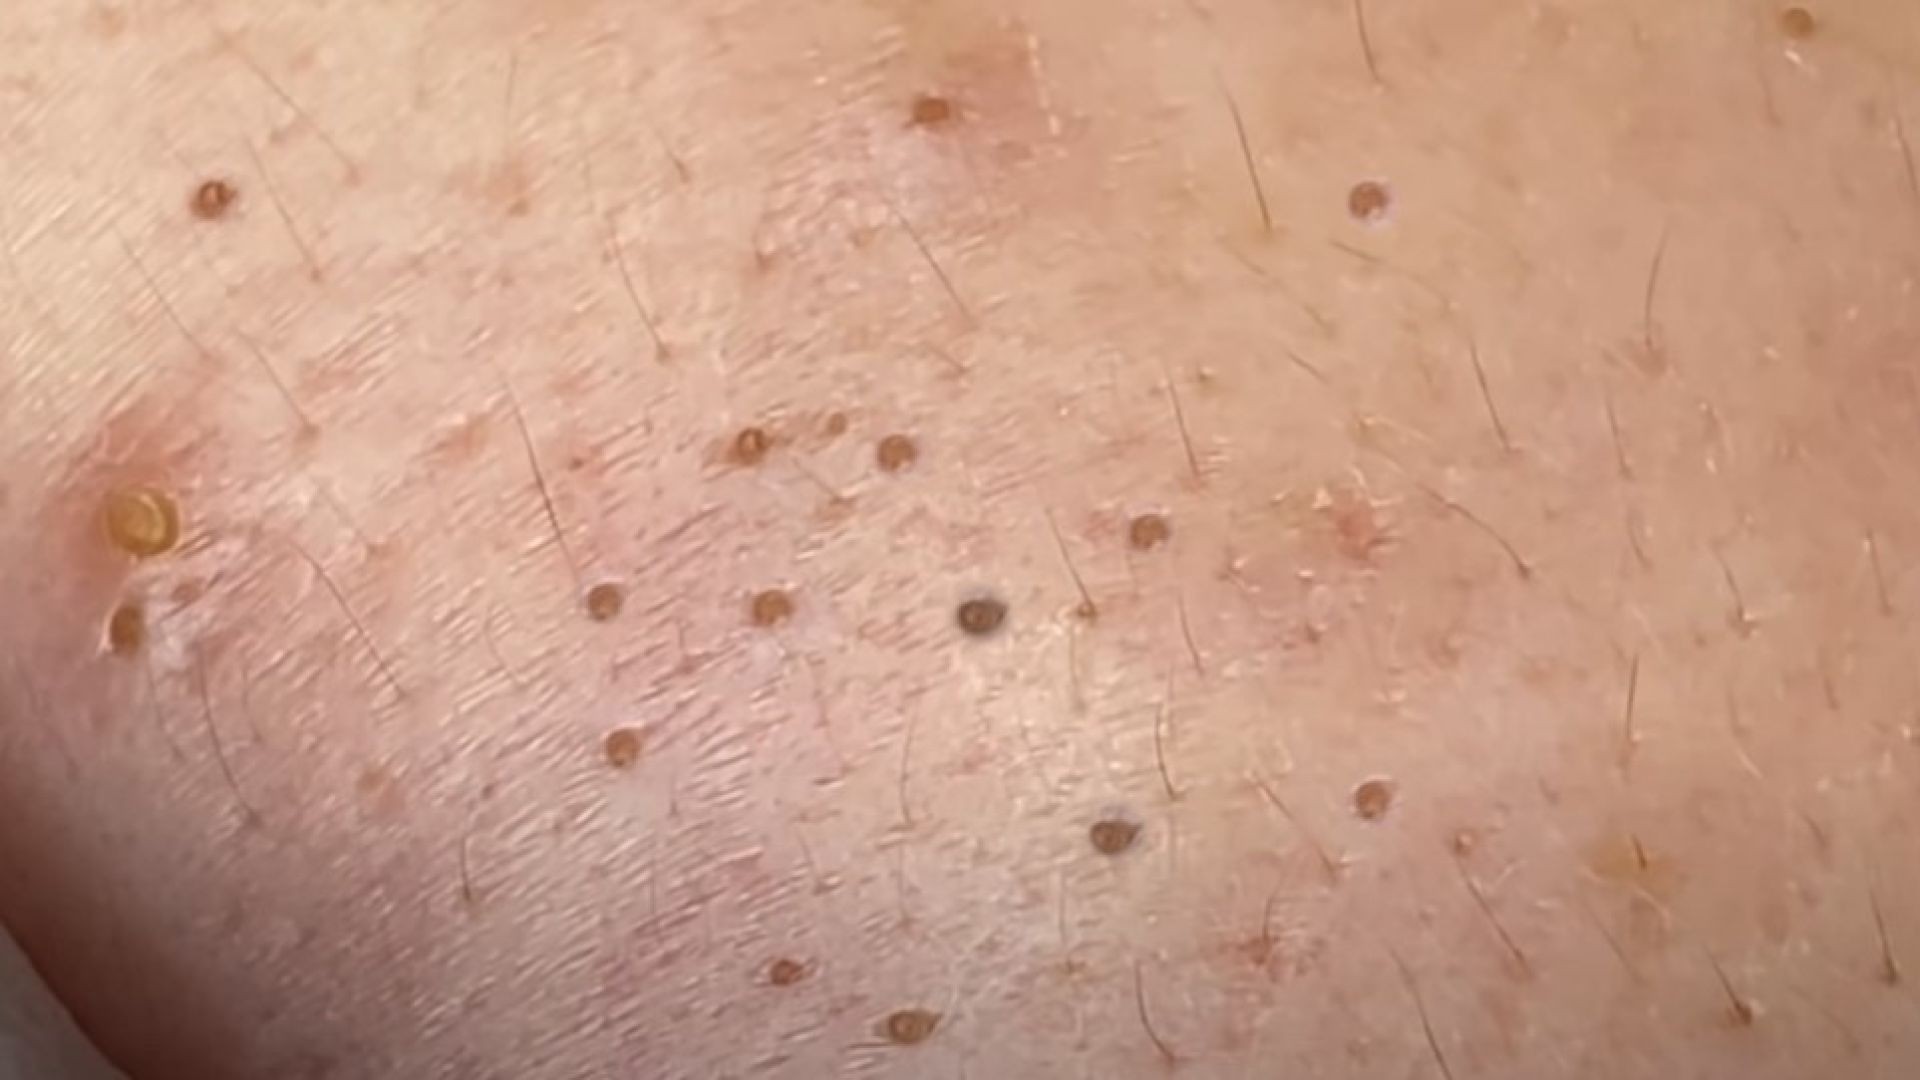 These blackheads up close bring so much satisfaction